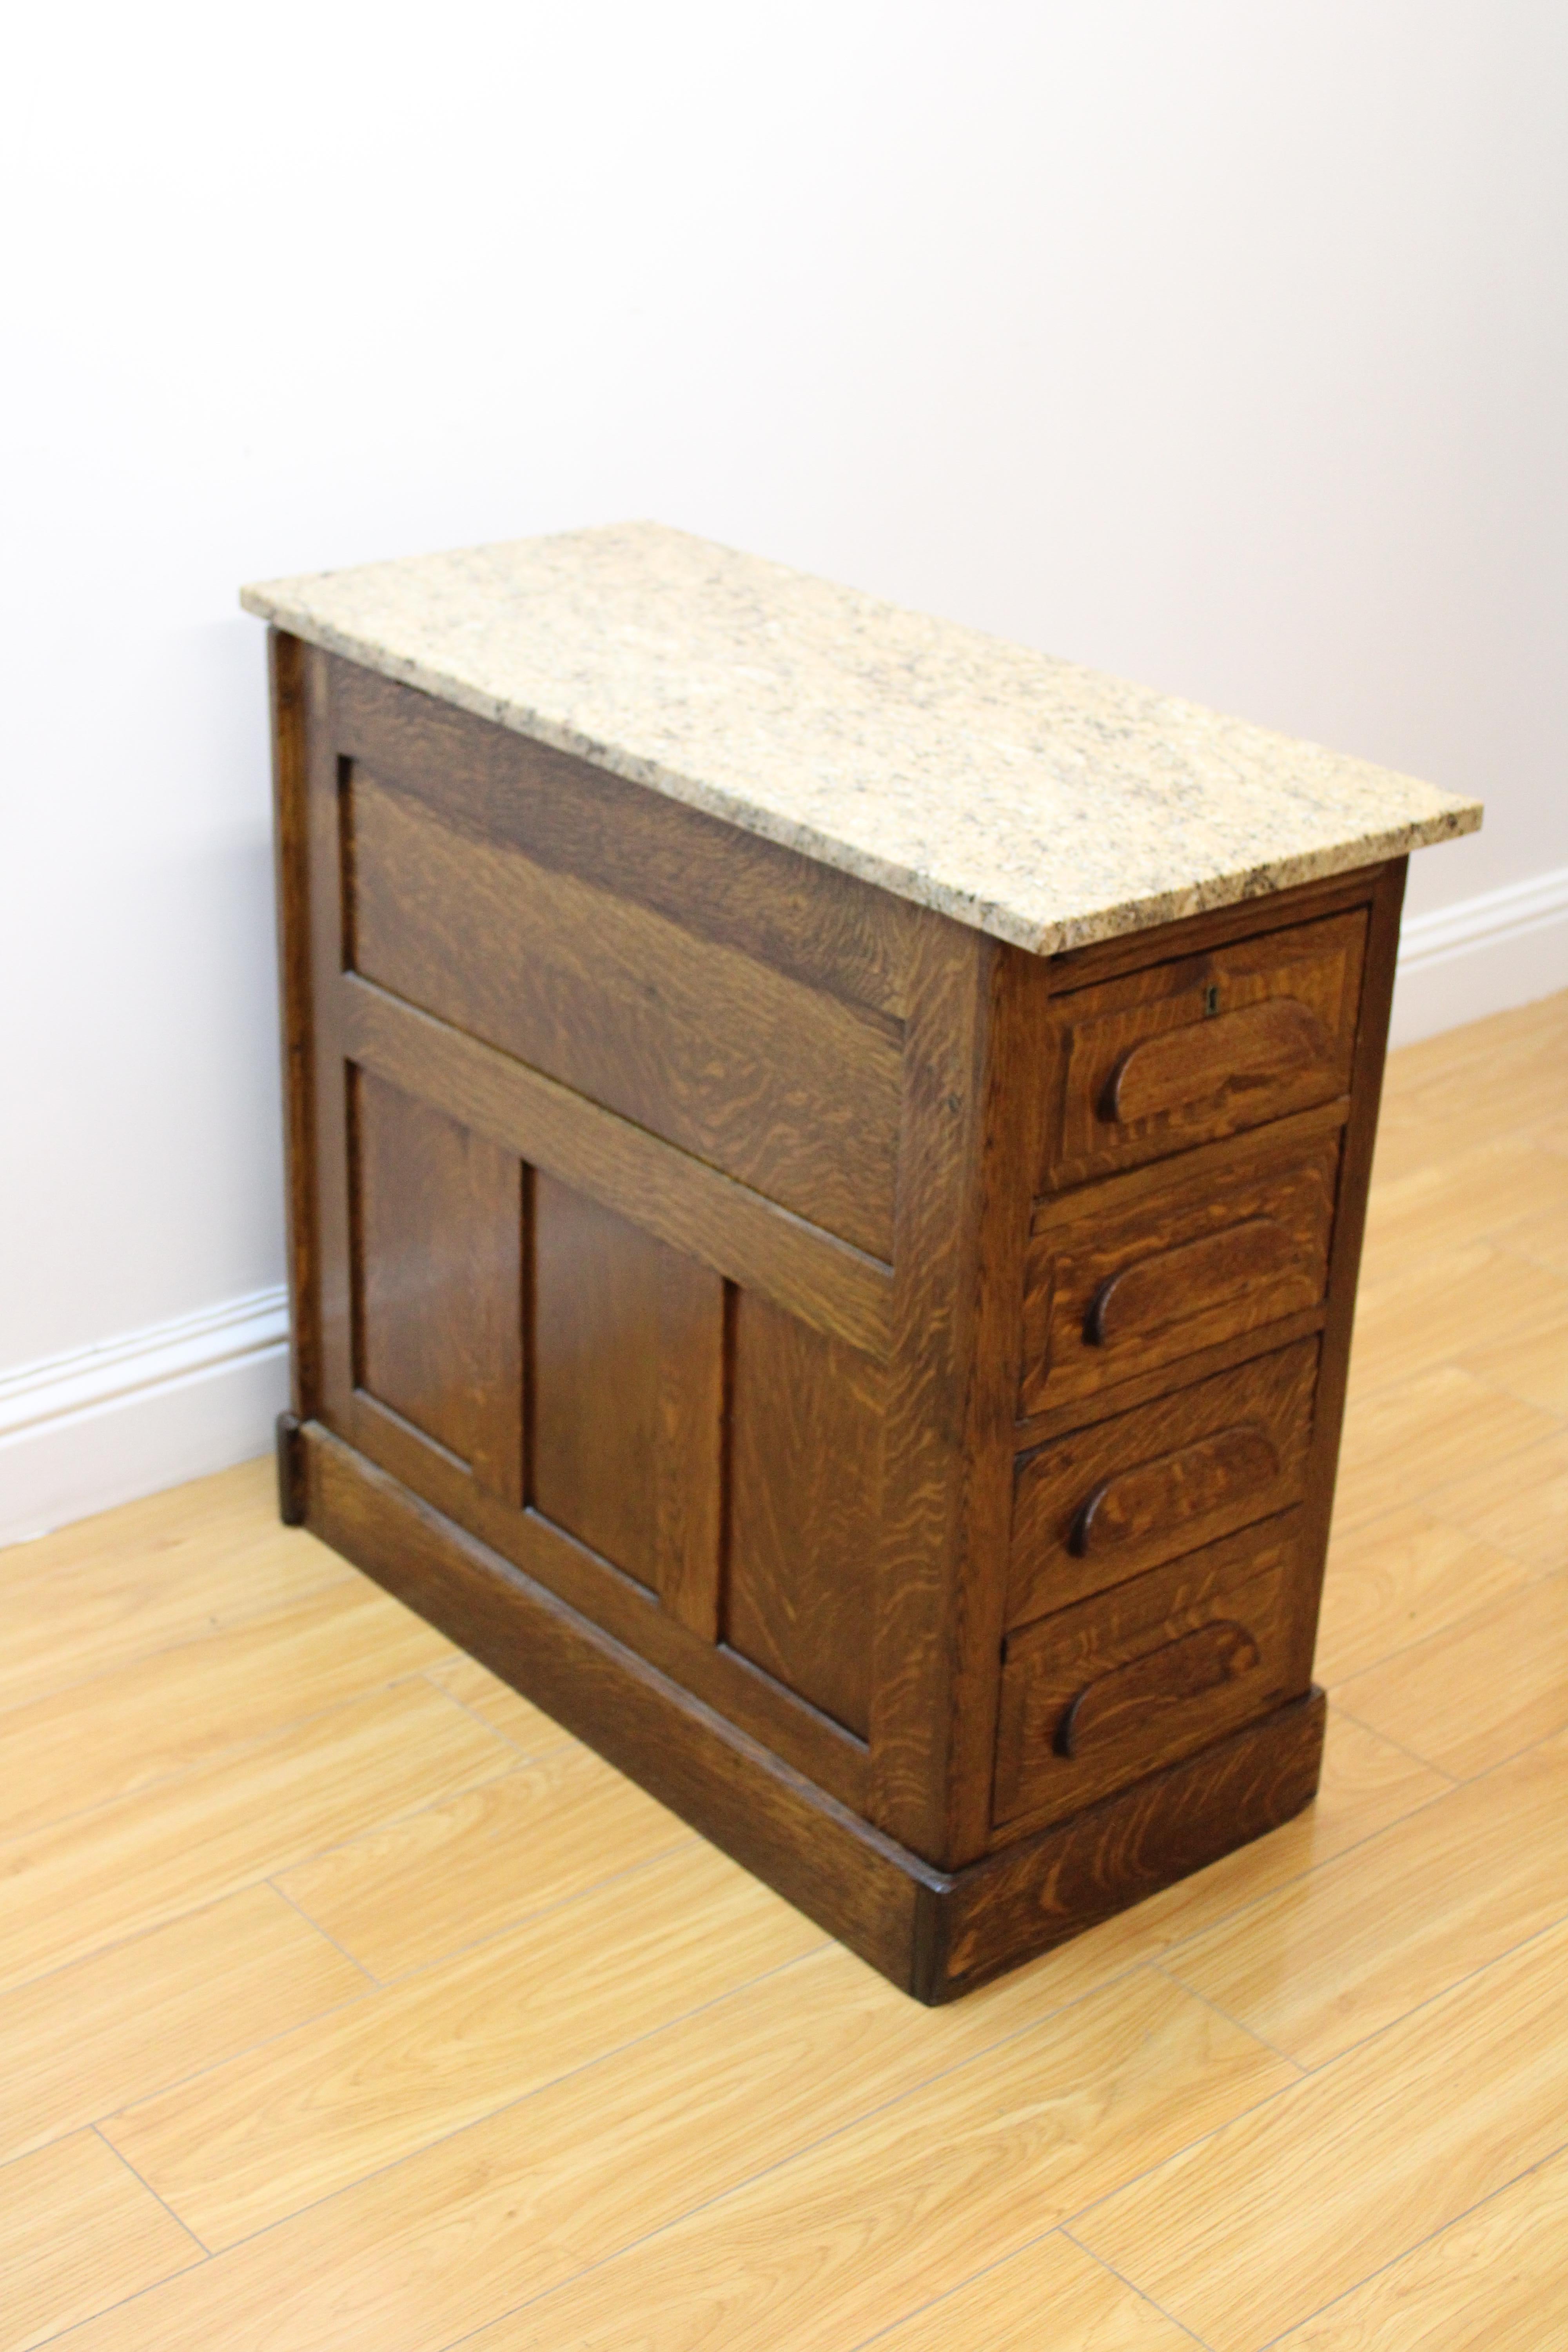 C. Early 20th Century

Arts & Crafts - Oak & marble top end table / dresser drawers.
Can be used as a Night Stand, There is a Pull out flat piece ( As seen in picture )

Very Good Condition & Sturdy.